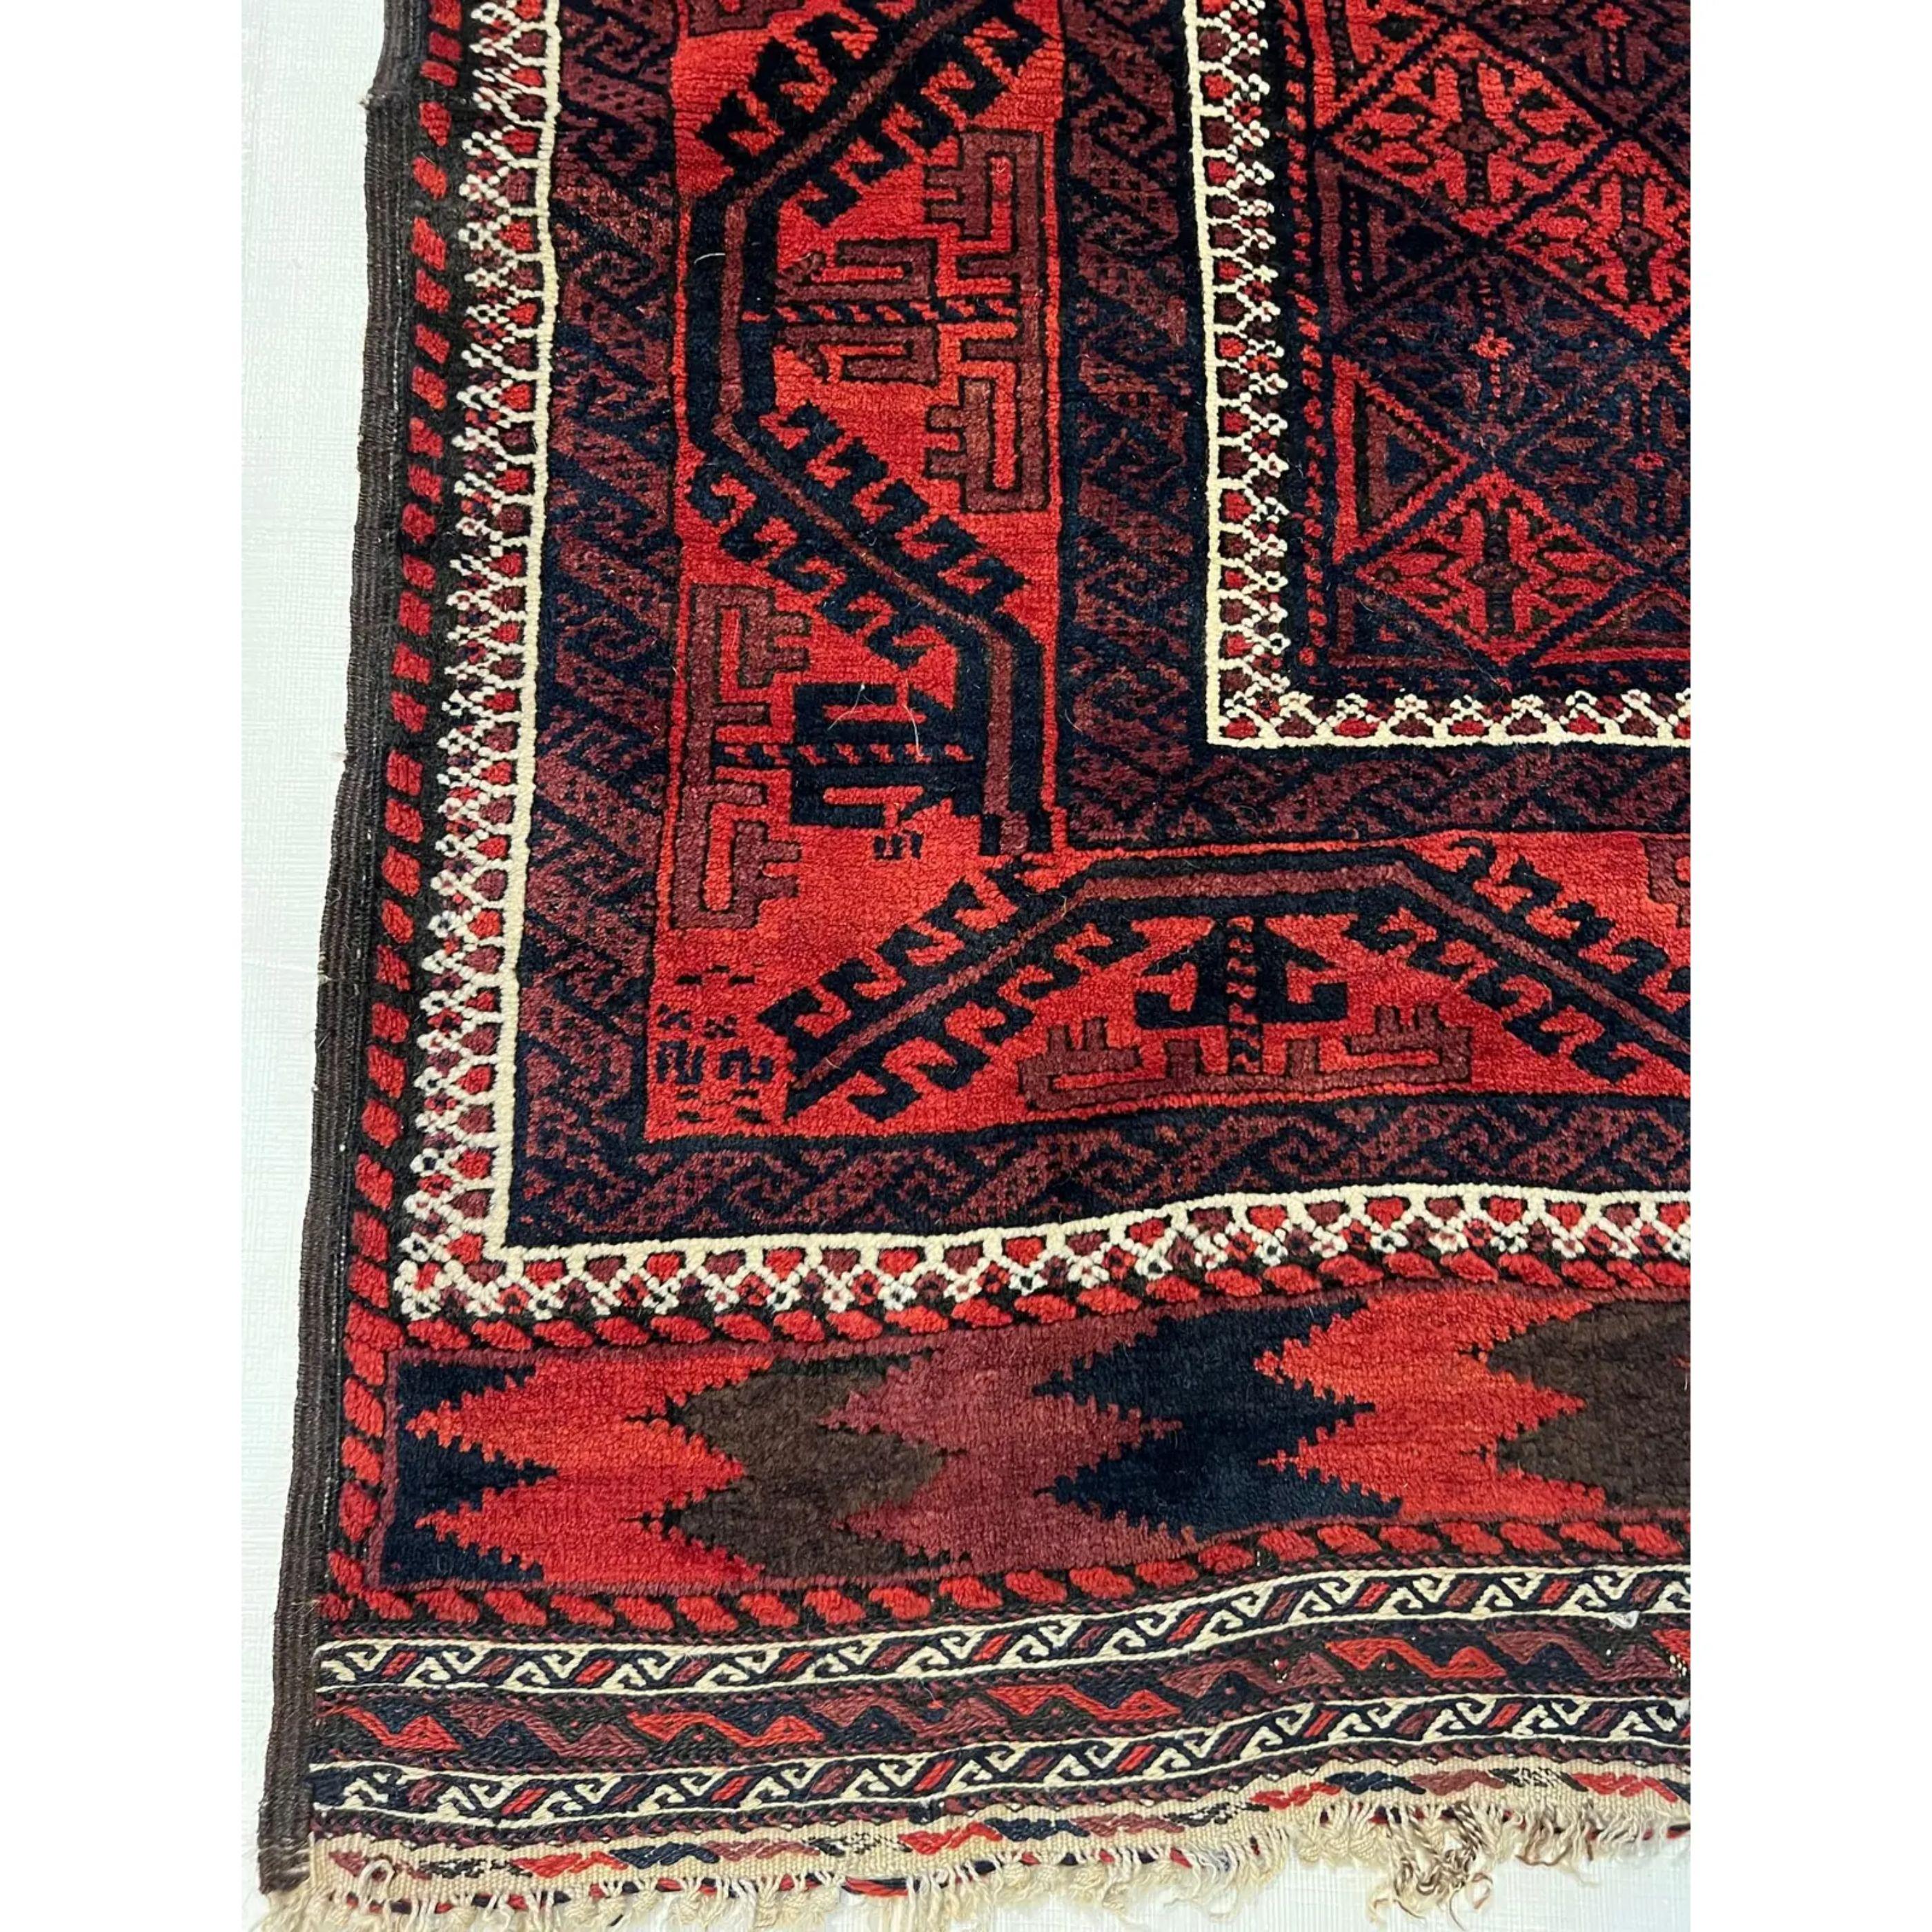 1900s Antique Persian Baloutch Rug, Handmade and hand-knotted